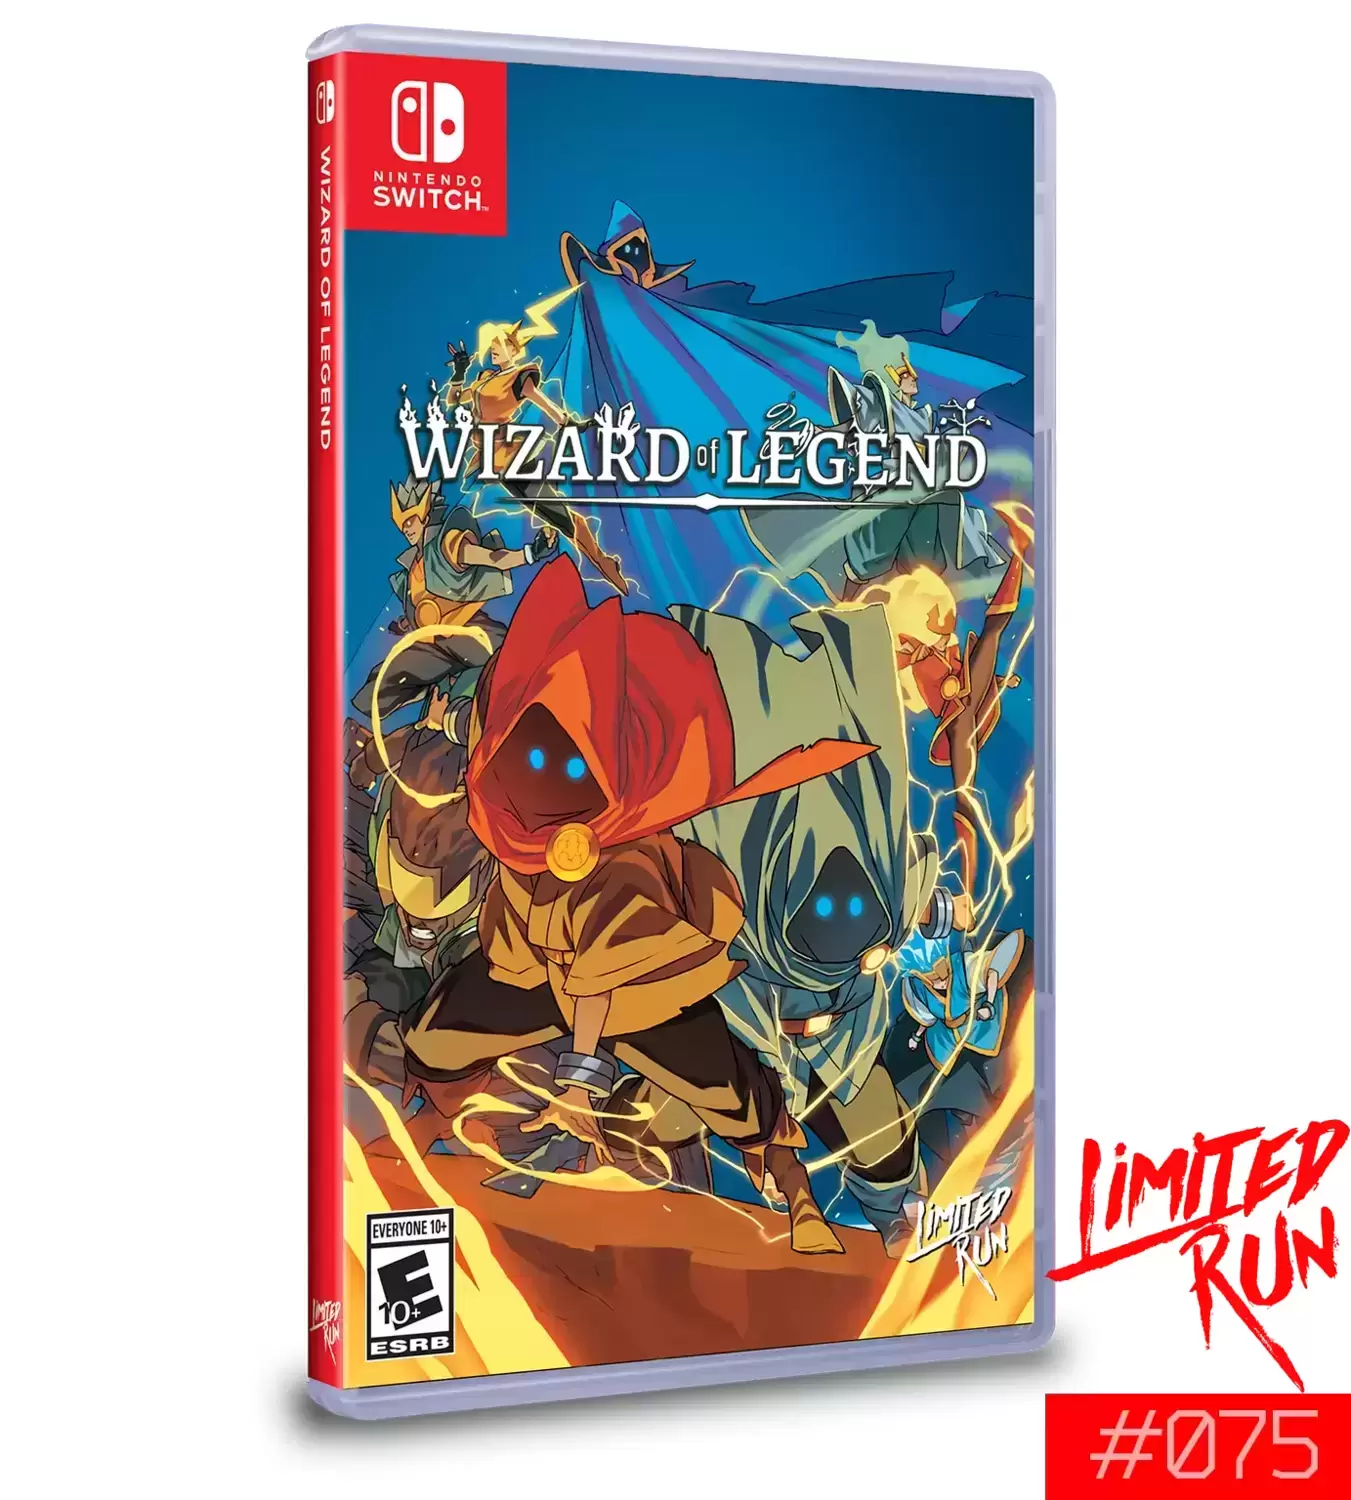 Nintendo Switch Games - Wizard of Legend - Limited Run Games #075